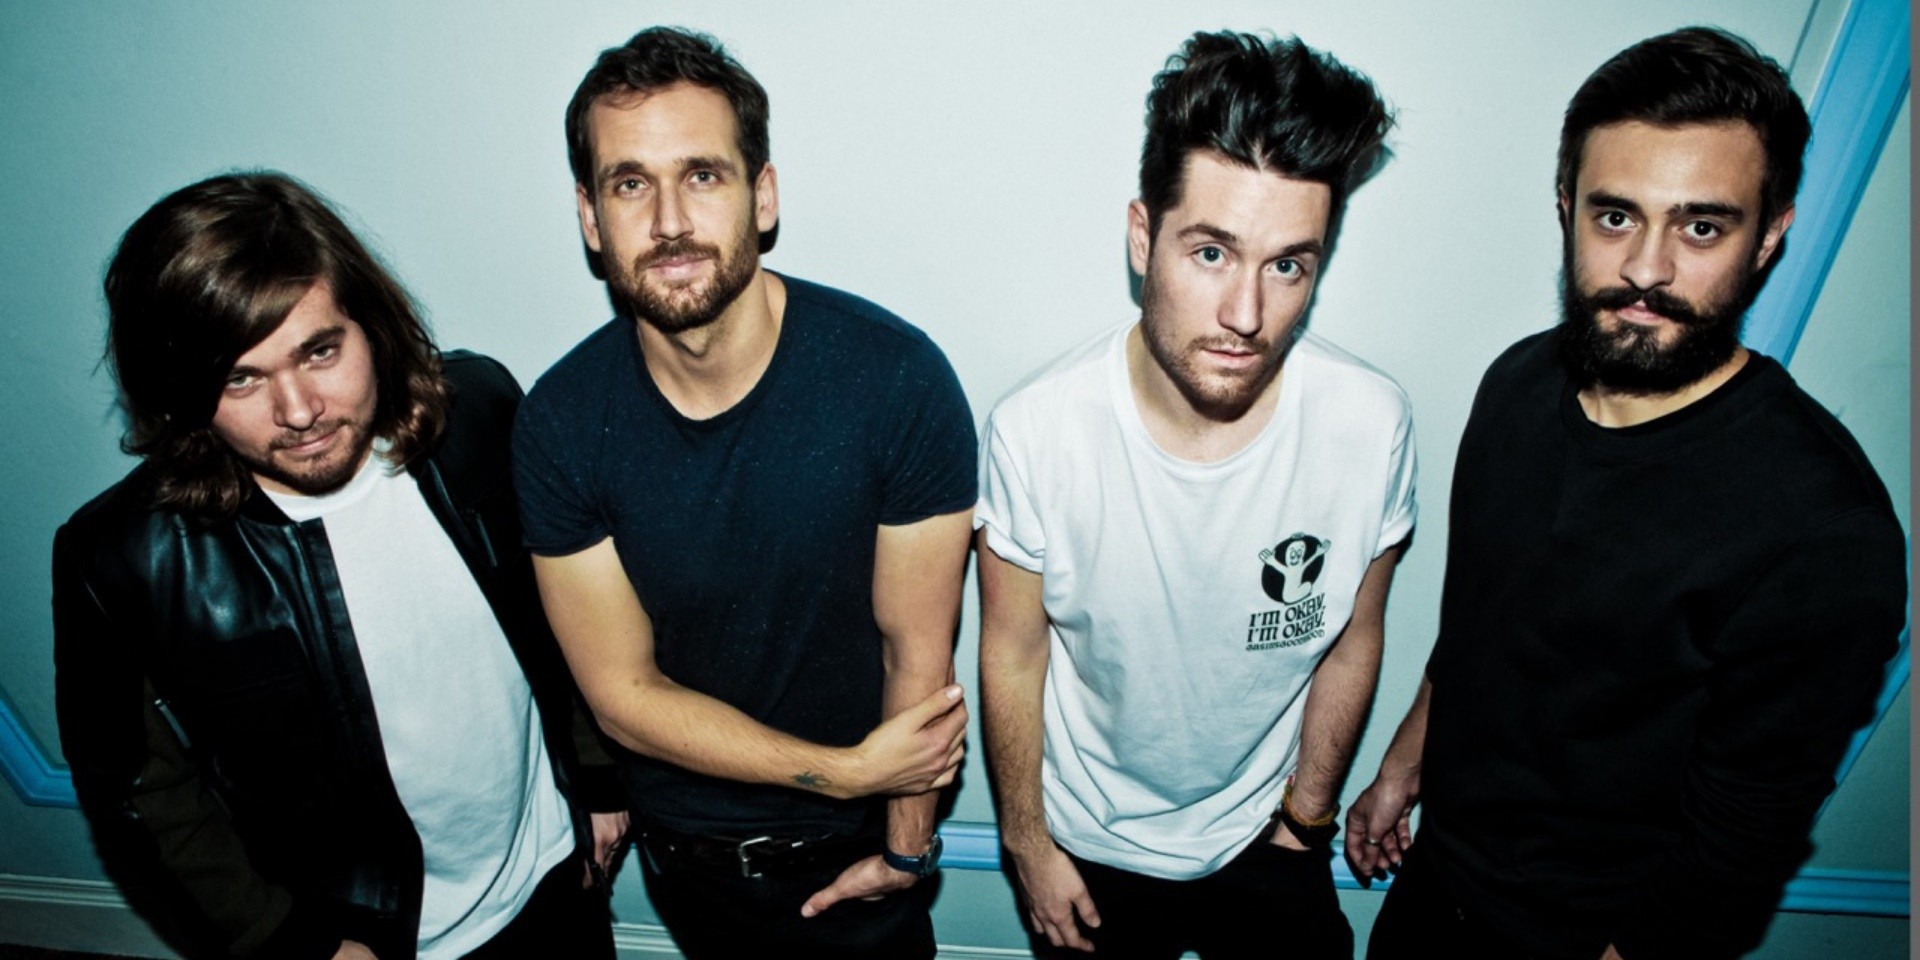 Bastille announces release date of new mixtape along with a new track — listen